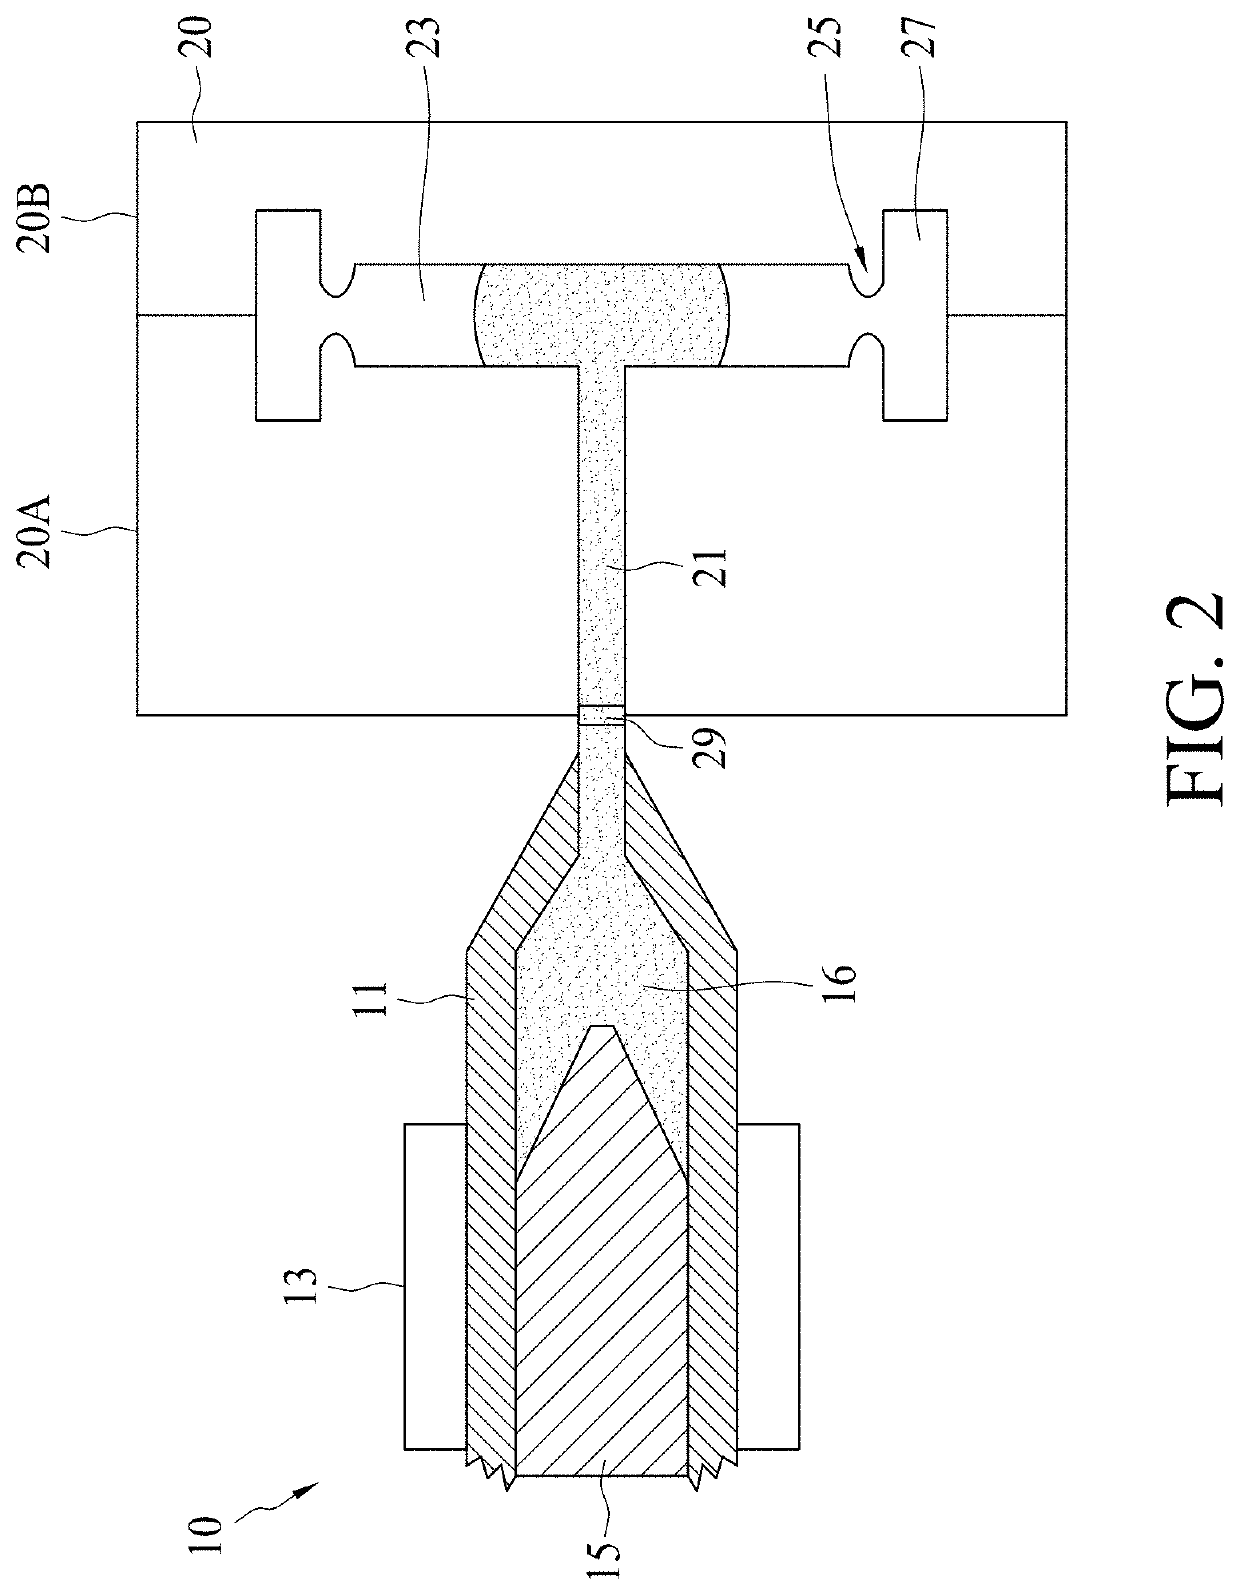 Method for setting up a molding system